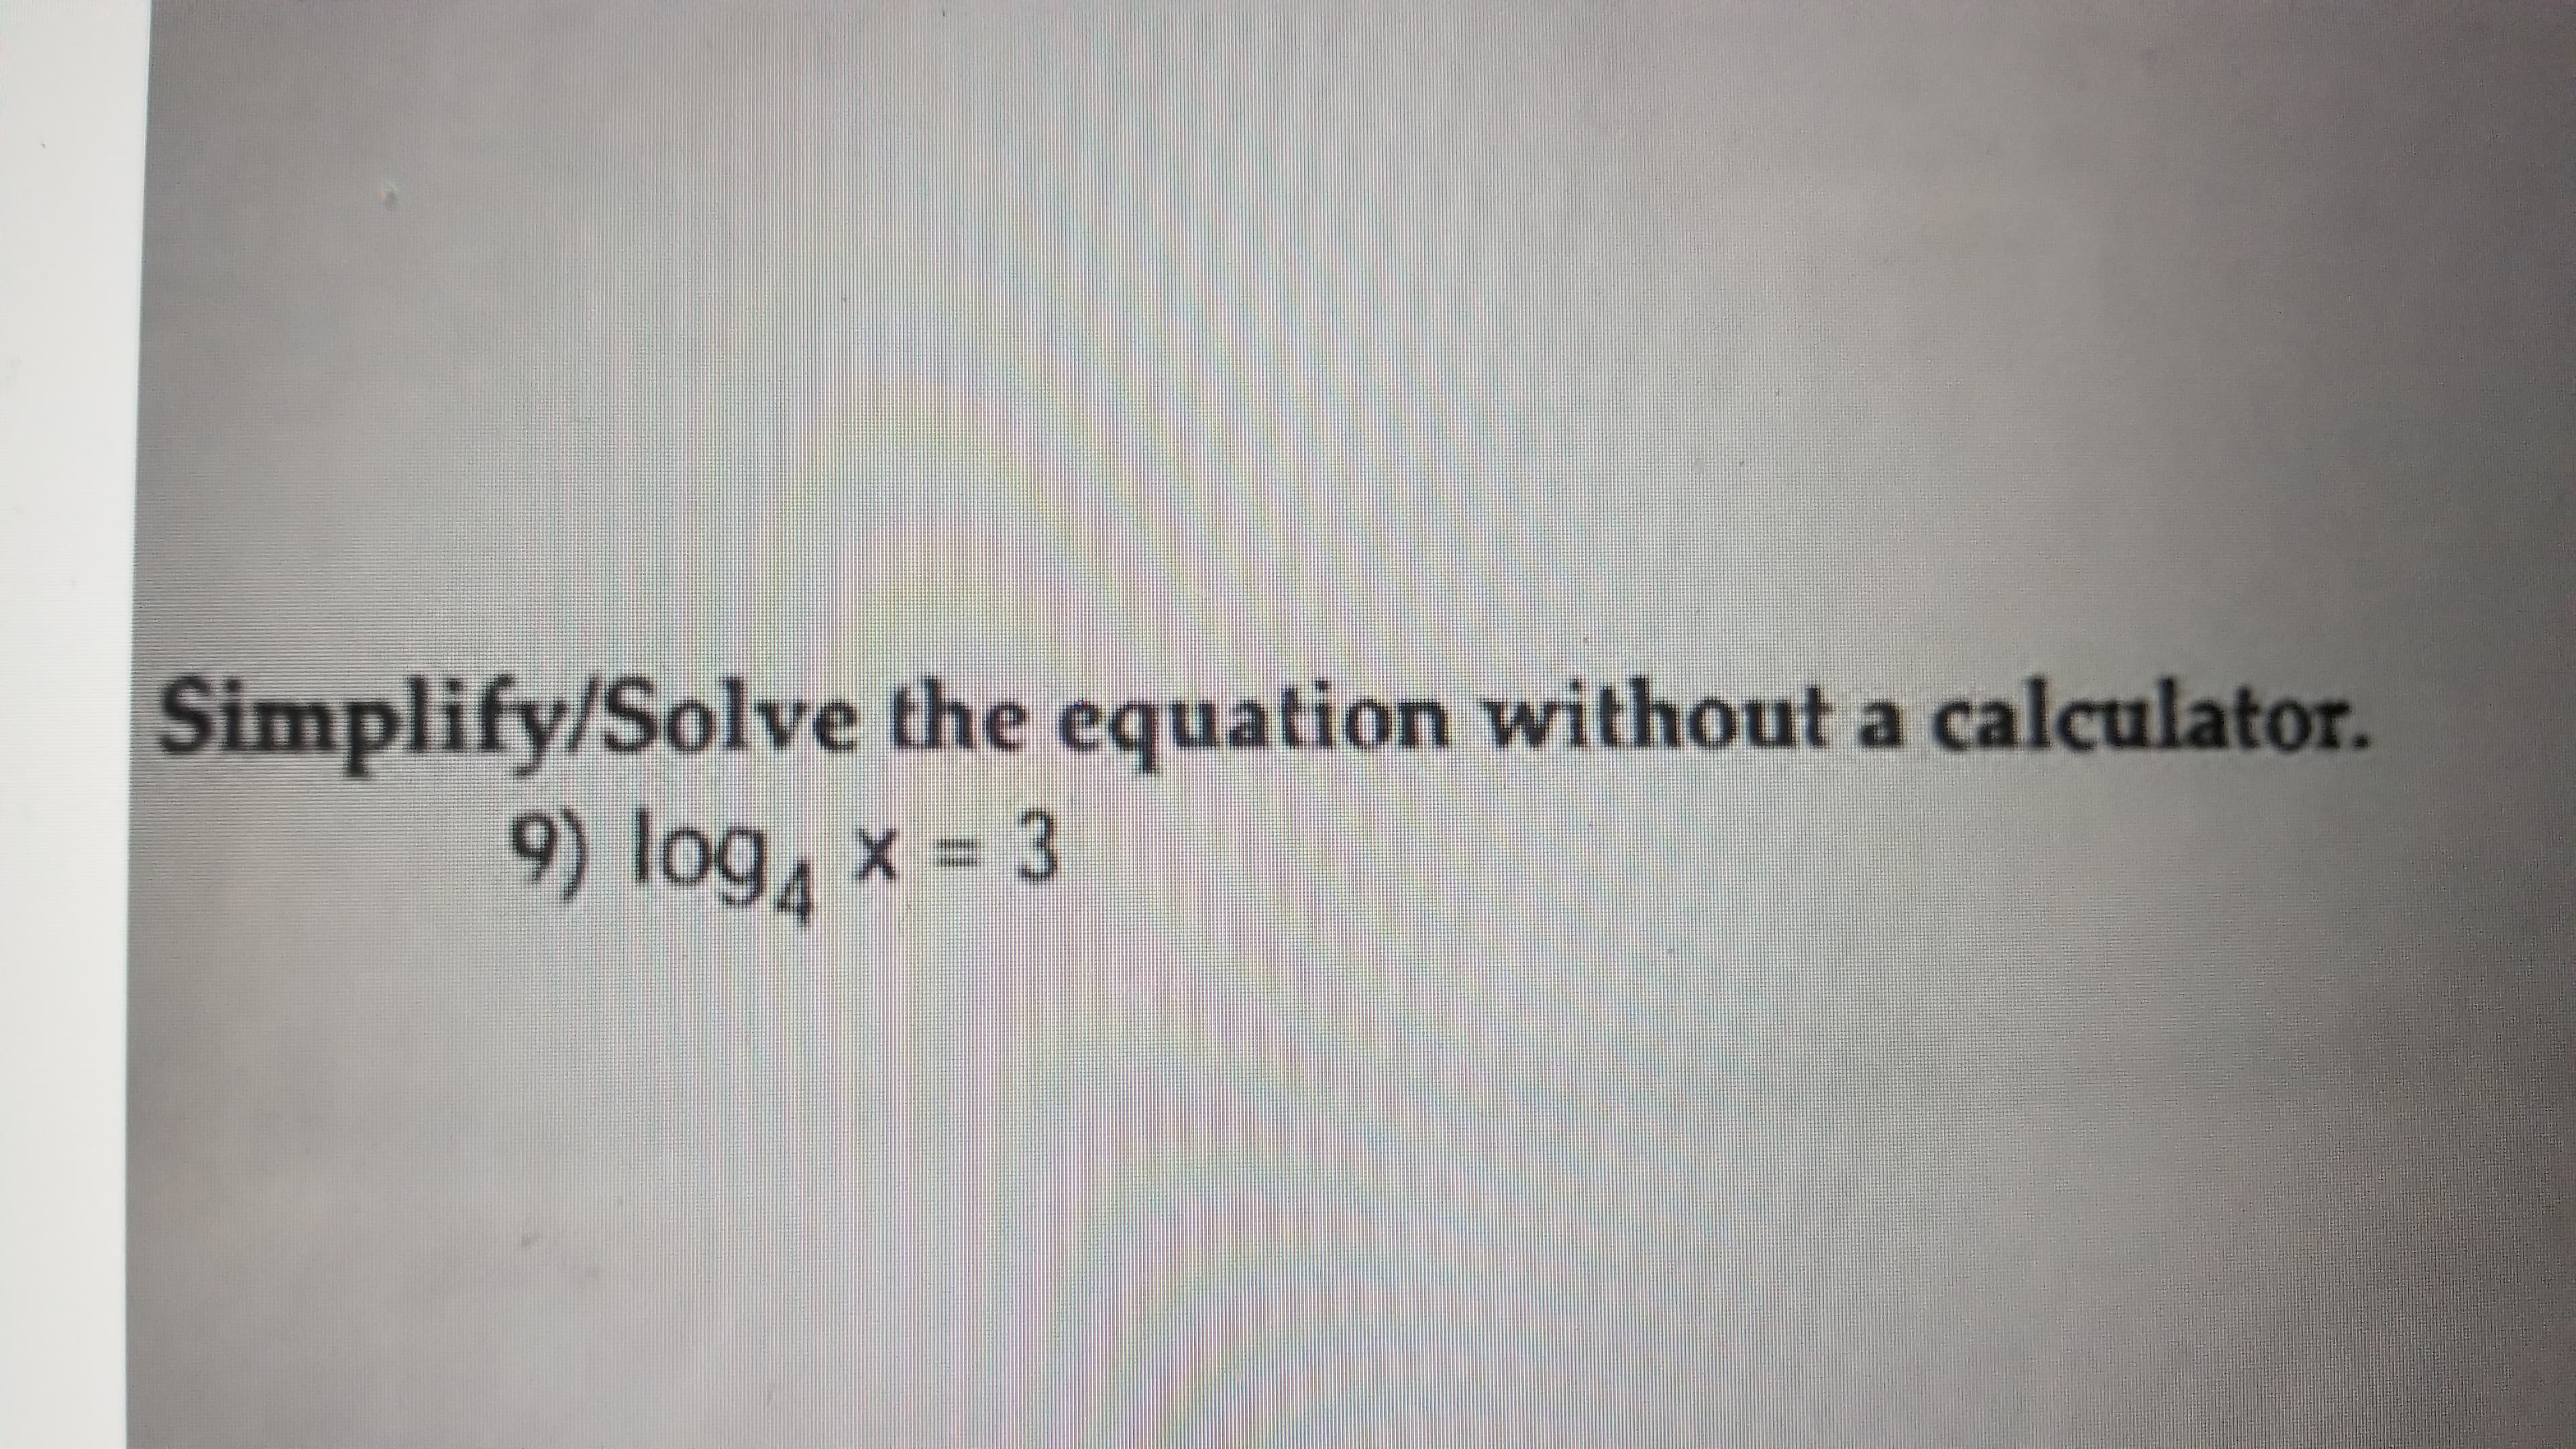 Simplify/Solve the equation without a calculator.
9) logA
